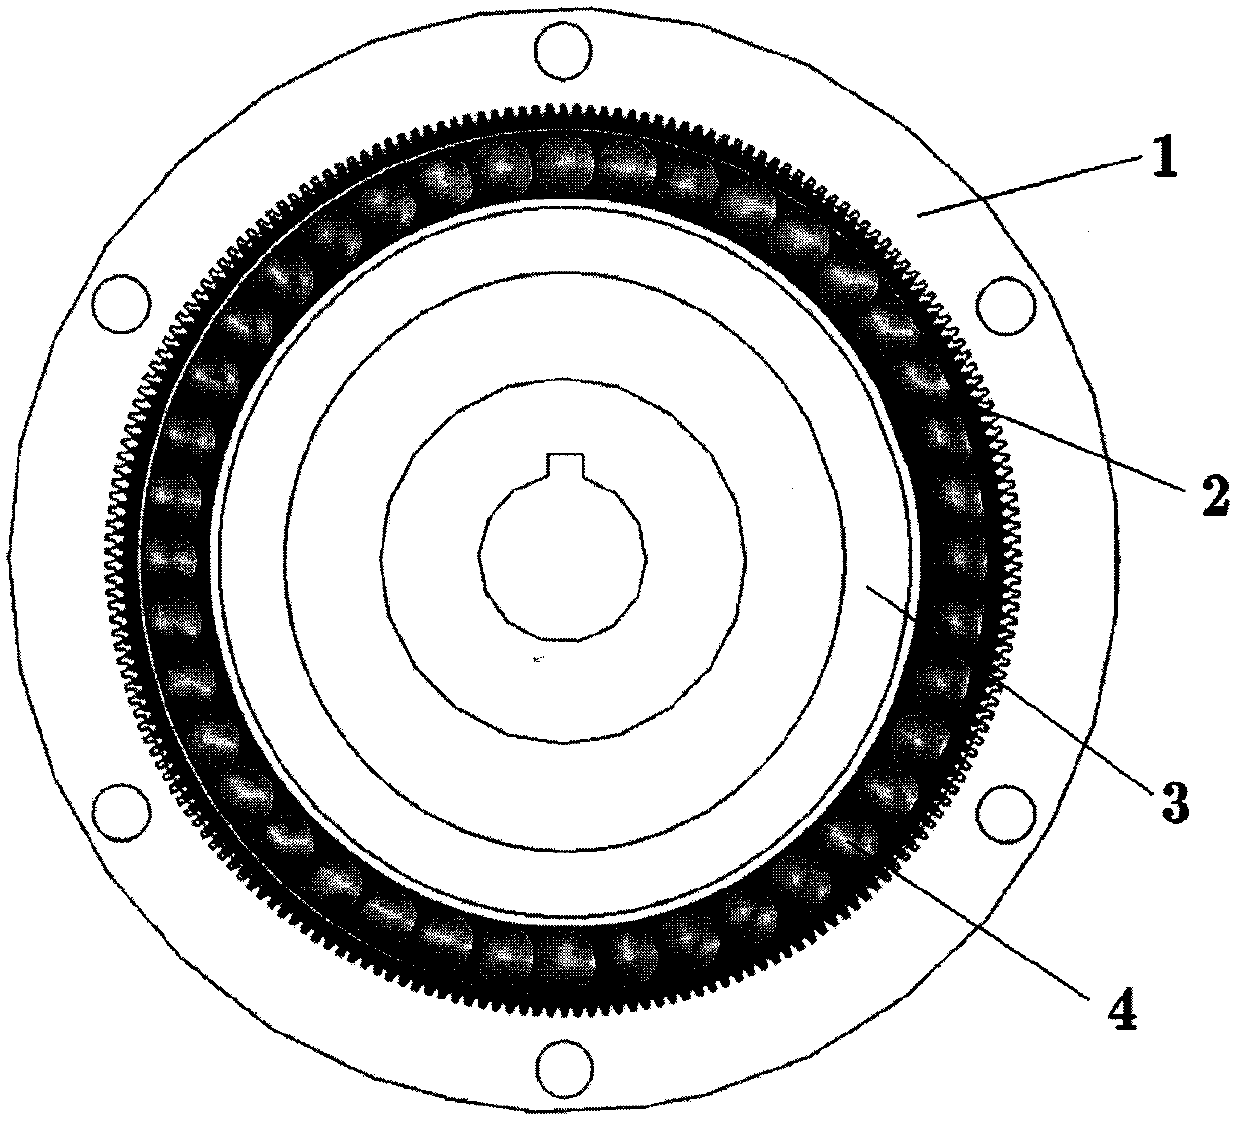 Design for three-circular-arc tooth profiles of continuous conjugate cup-shaped or silk-hat-shaped harmonic gear